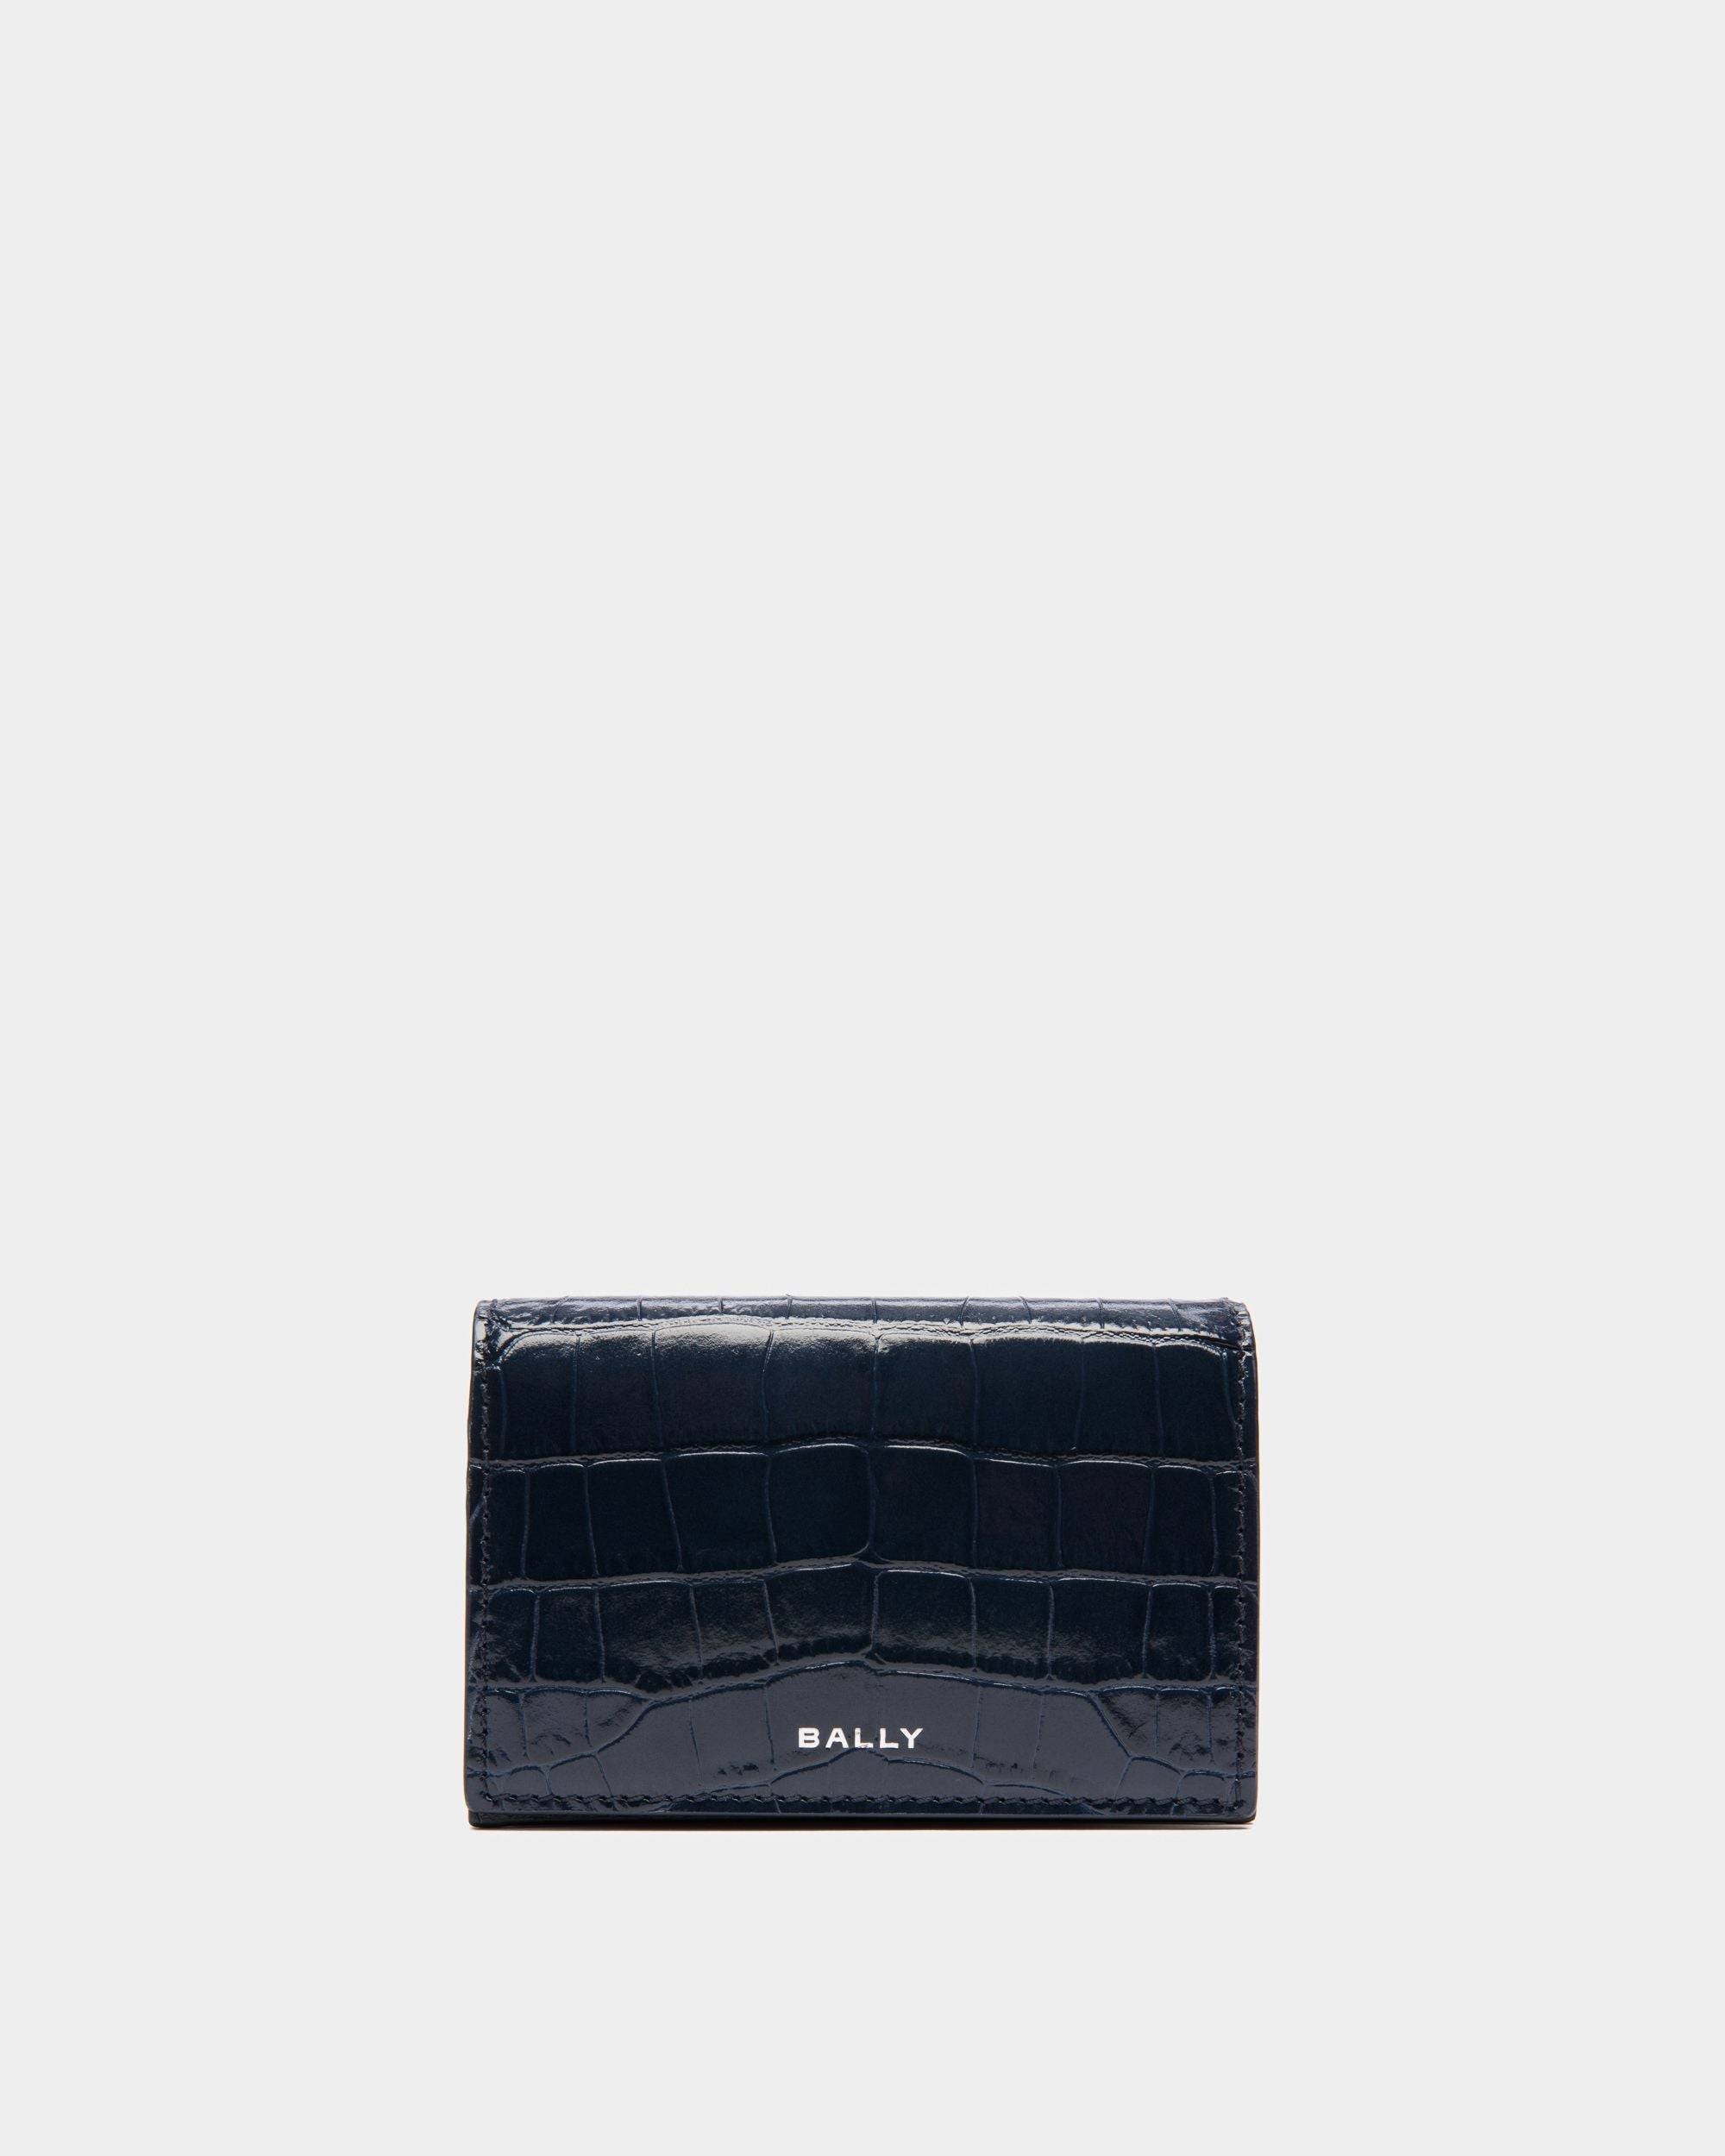 Men's Leather Wallets, Card Holders & Coin Pouches | Bally